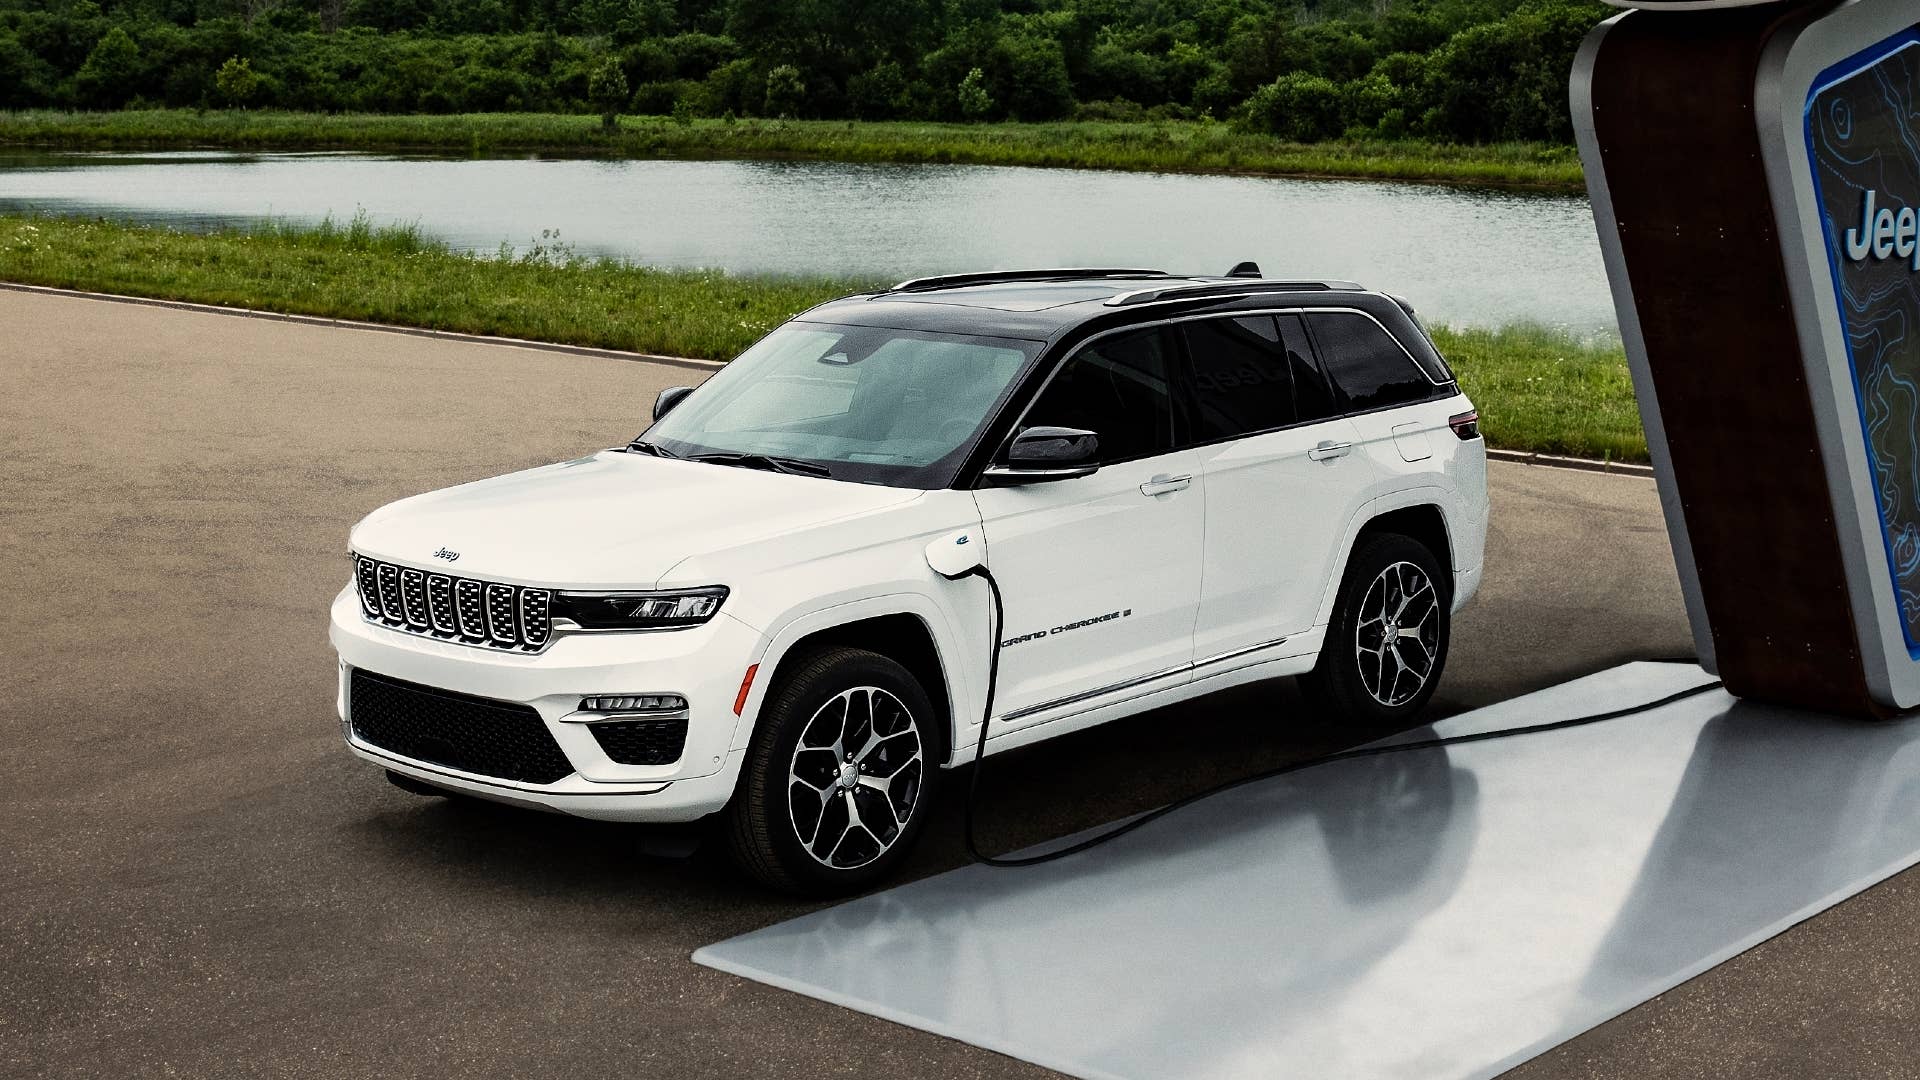 Here's Your First Look at the 2022 Jeep Grand Cherokee Two